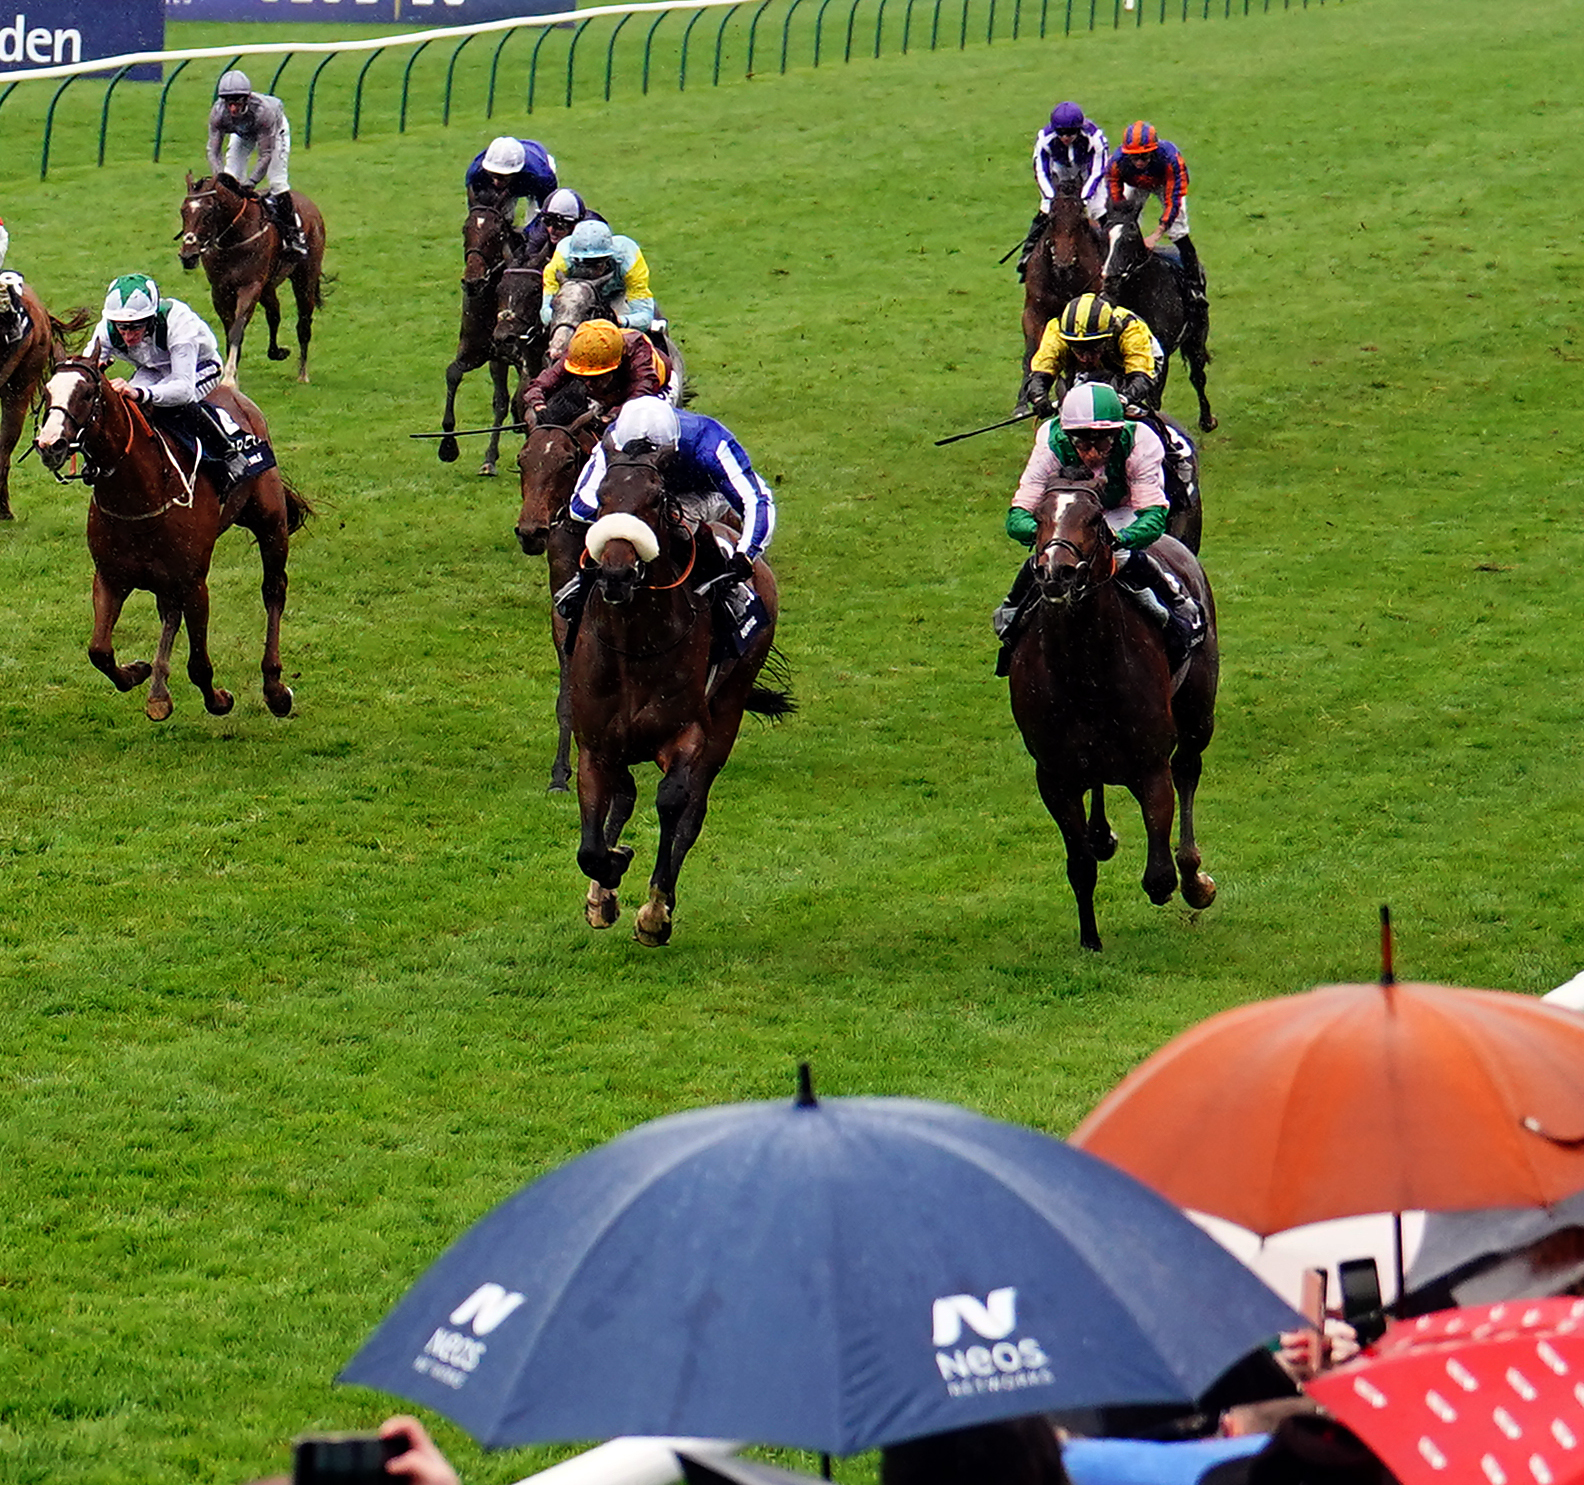 Little separated Hi Royal (left) and Royal Scotsman (right) in the 2000 Guineas 